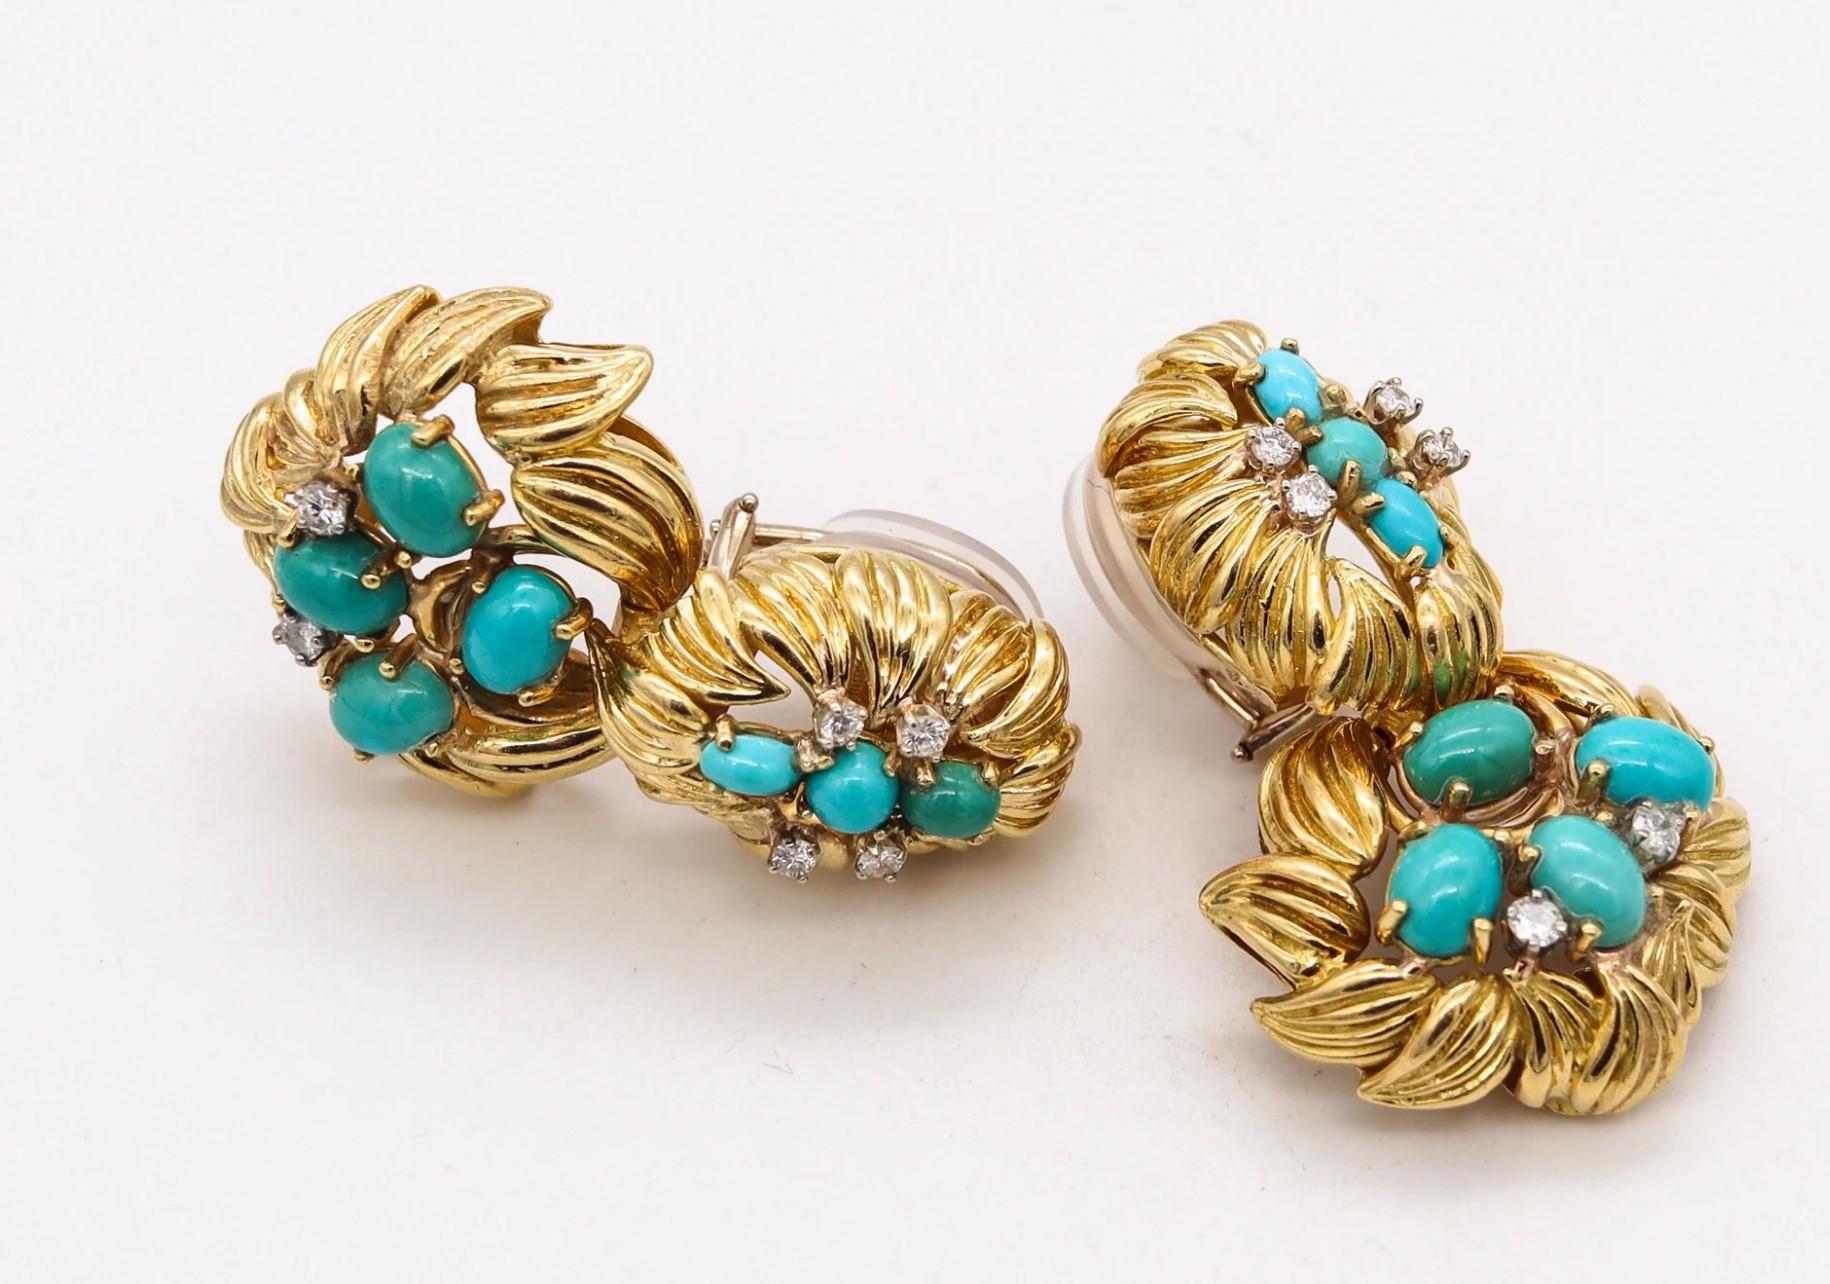 Mid Century Cluster gem-set drops earrings.

Beautiful pair created during the American late mid-century period, circa 1960's. These gem-set drop earrings has been crafted in two movable parts with organic elements in solid yellow gold of 18 karats,